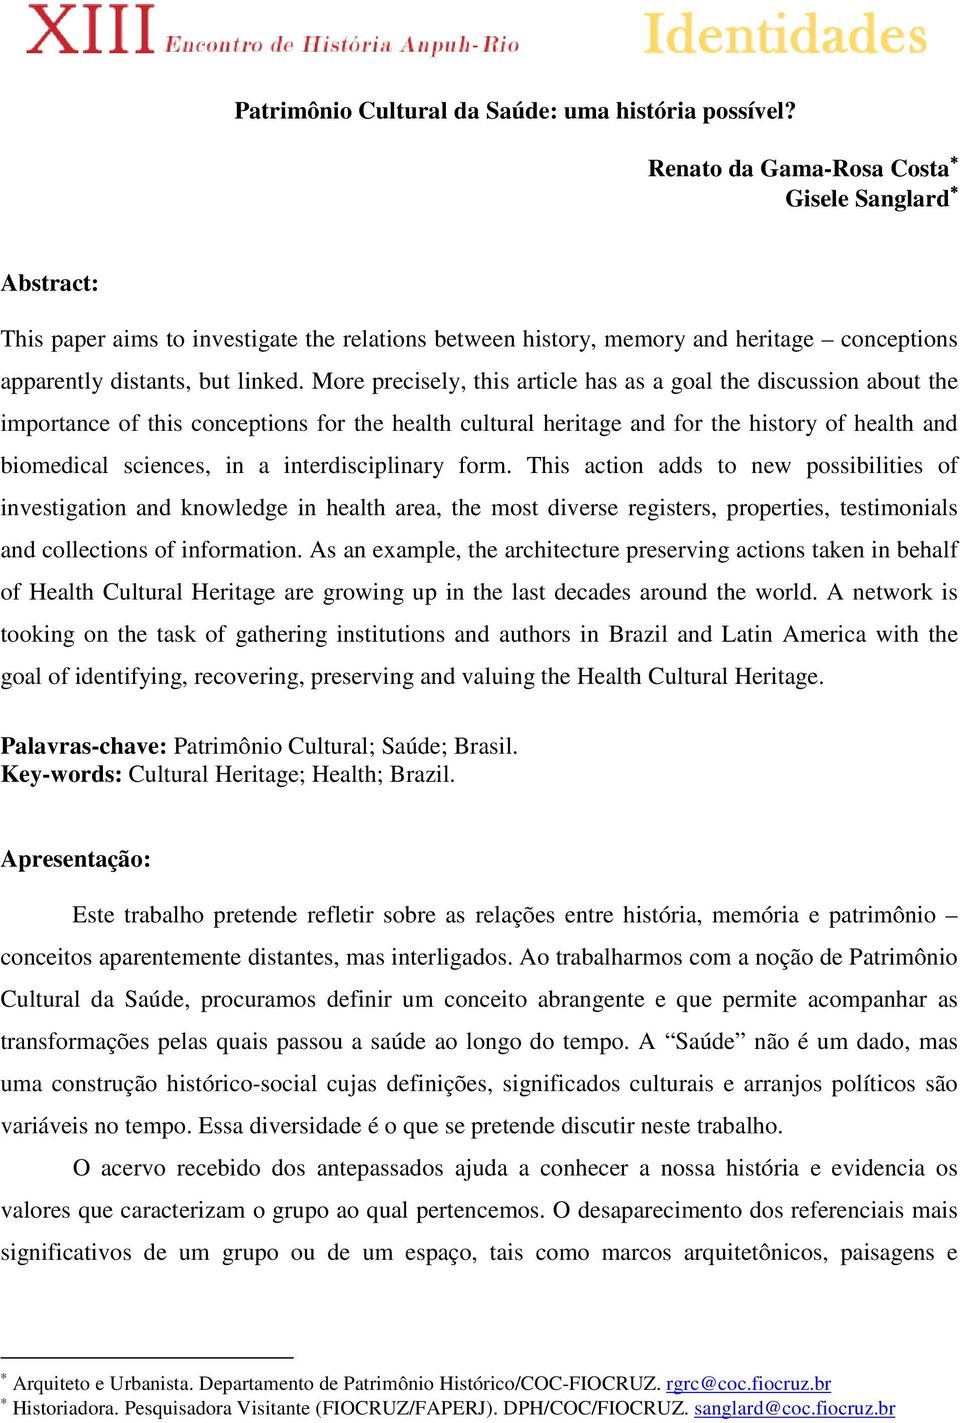 More precisely, this article has as a goal the discussion about the importance of this conceptions for the health cultural heritage and for the history of health and biomedical sciences, in a